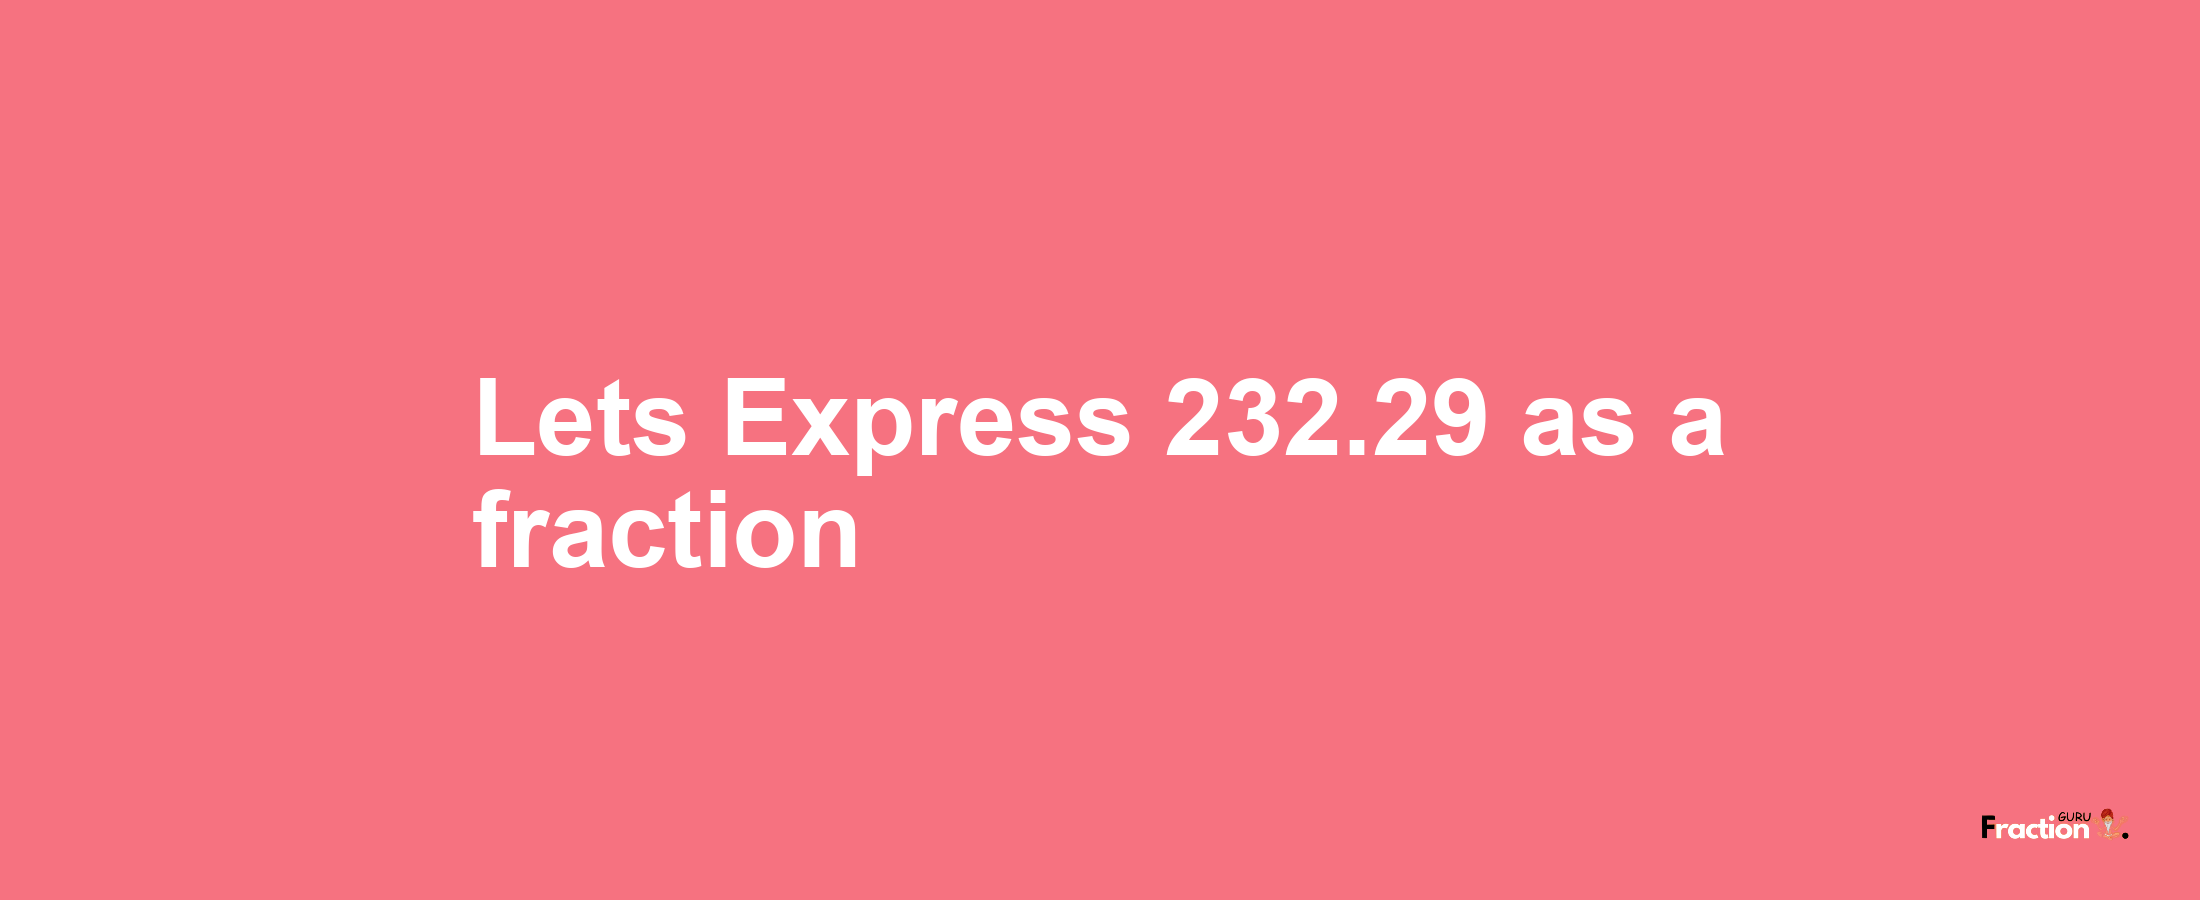 Lets Express 232.29 as afraction